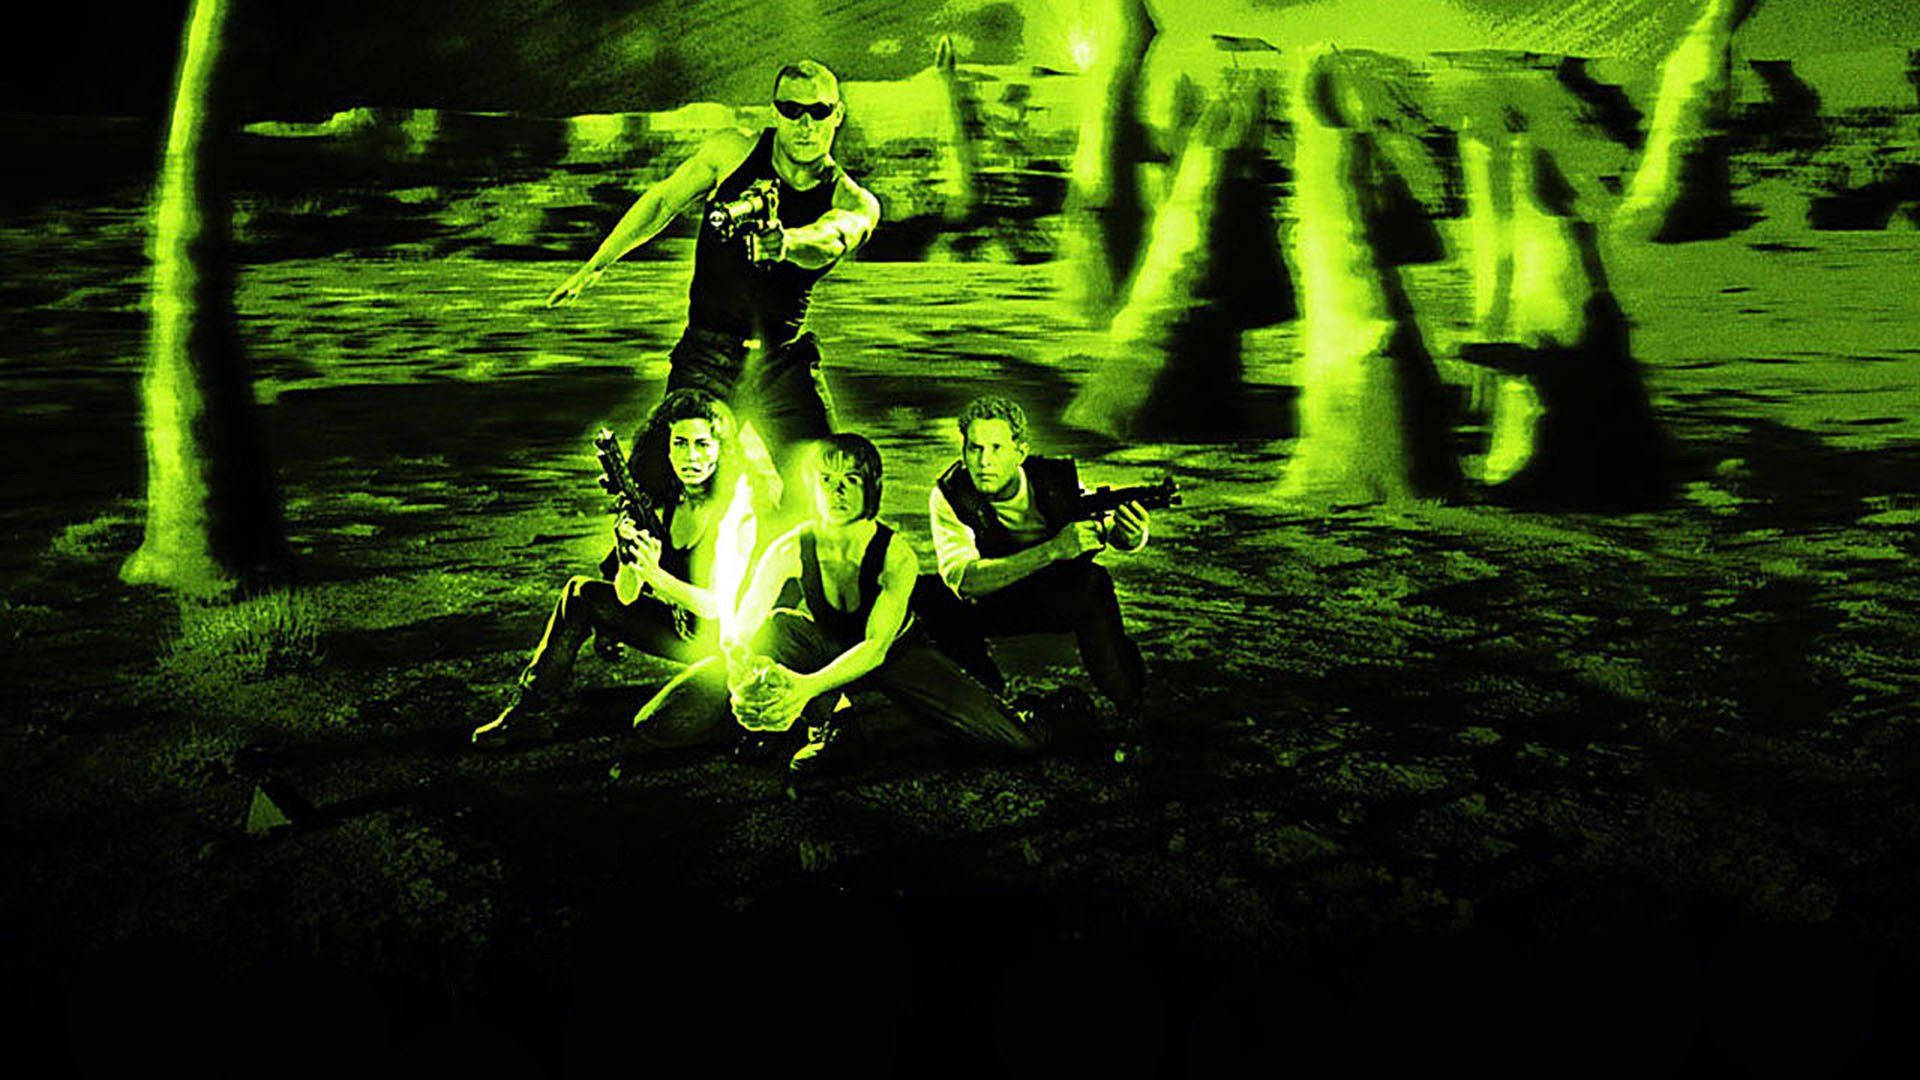 Pitch Black Cast In Night Vision Wallpaper